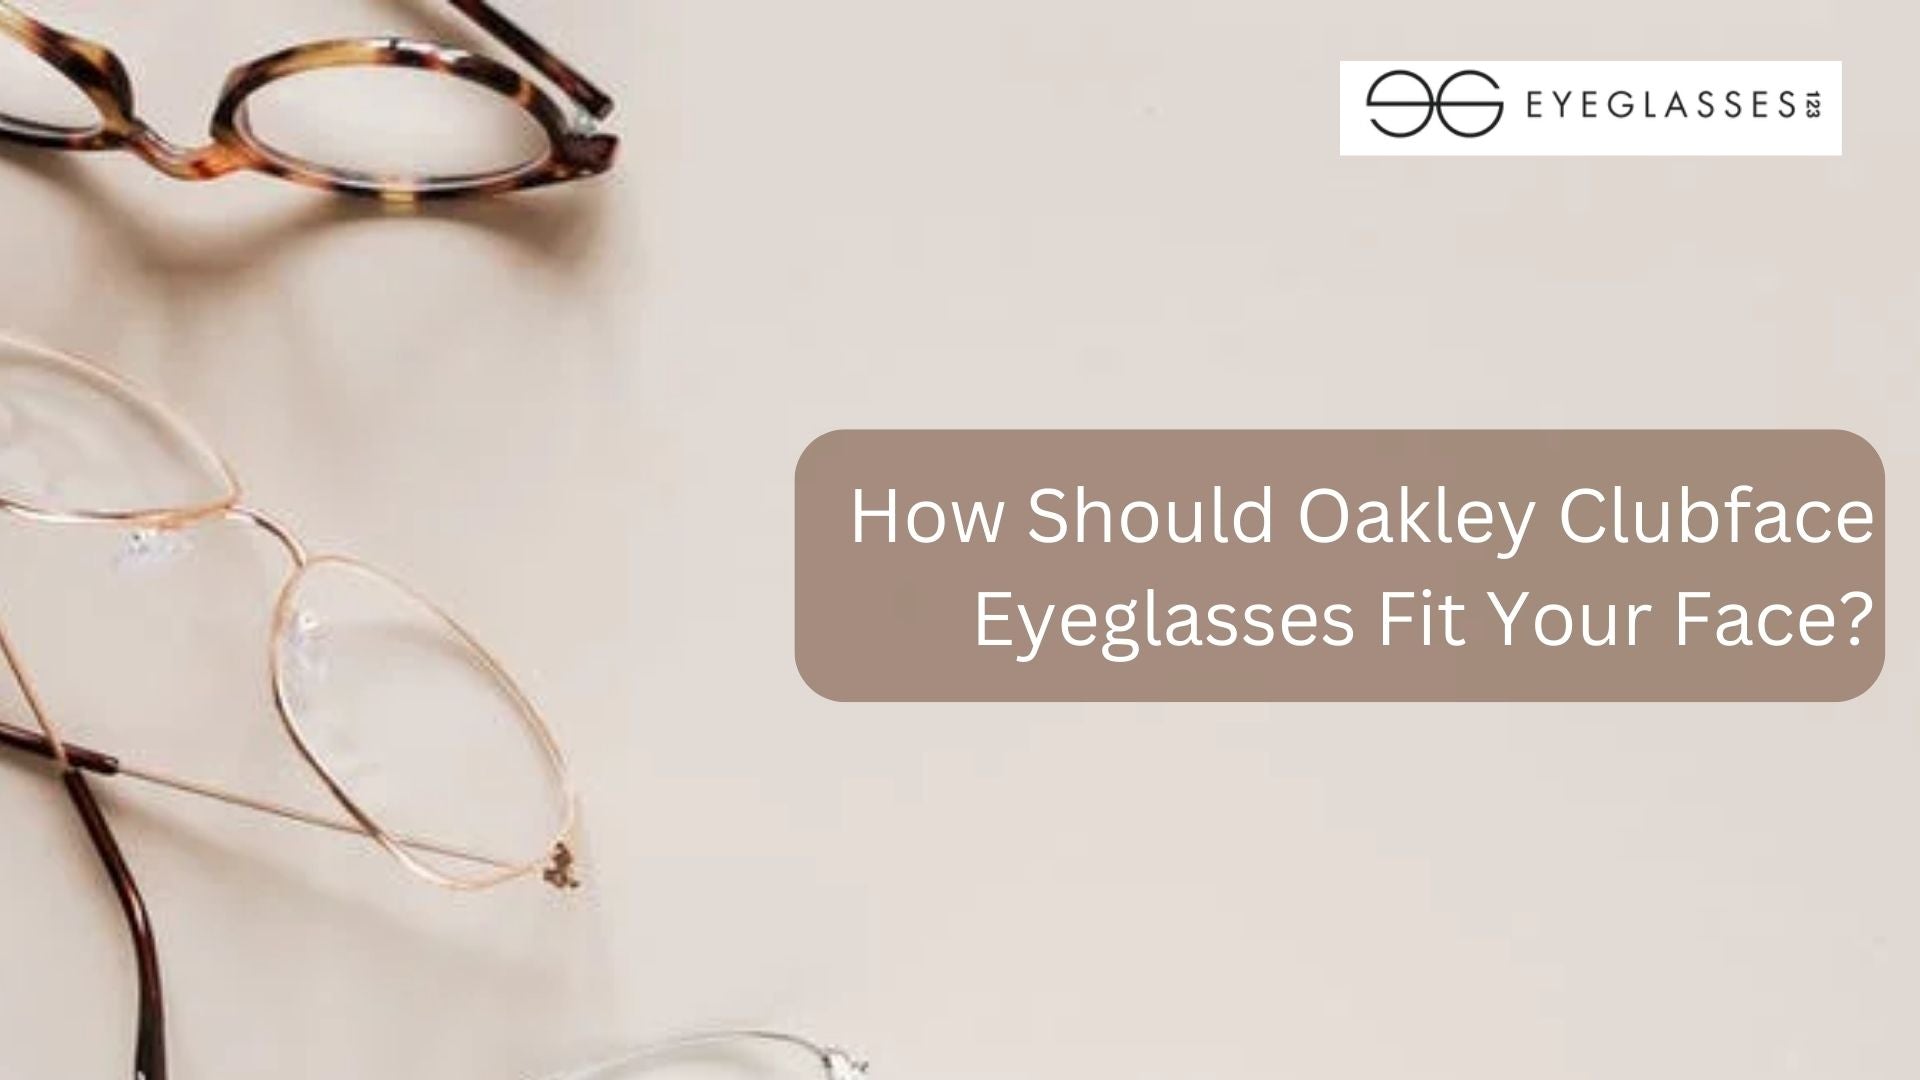 How Should Oakley Clubface Eyeglasses Fit Your Face?